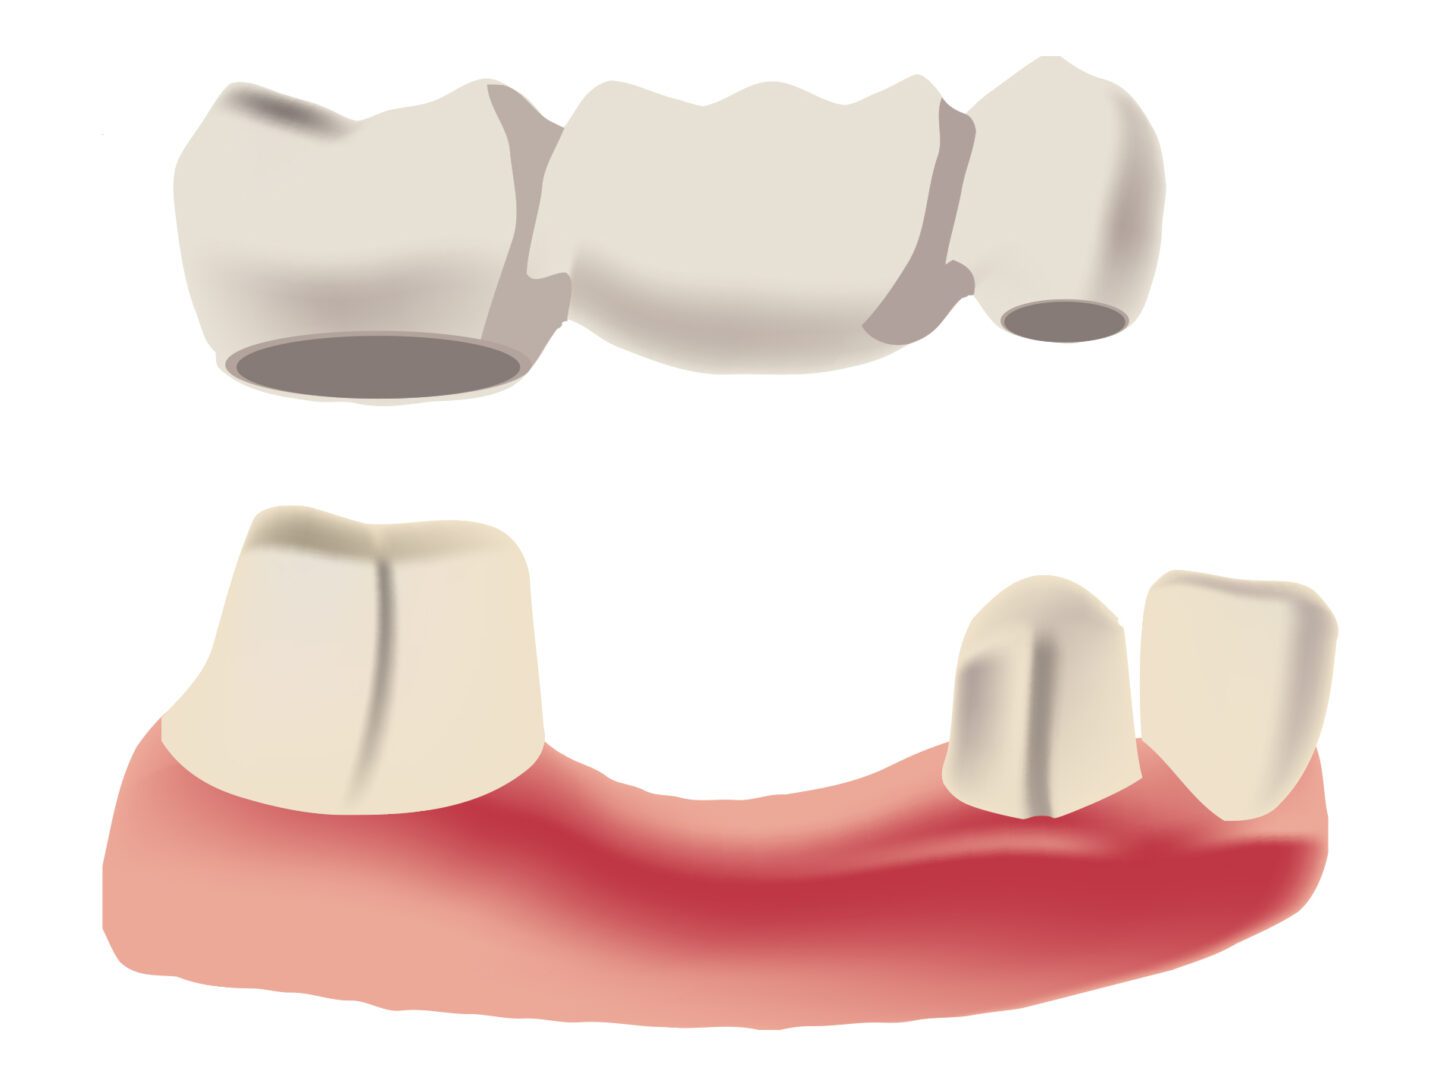 A diagram of the process of dental crowns and bridges.